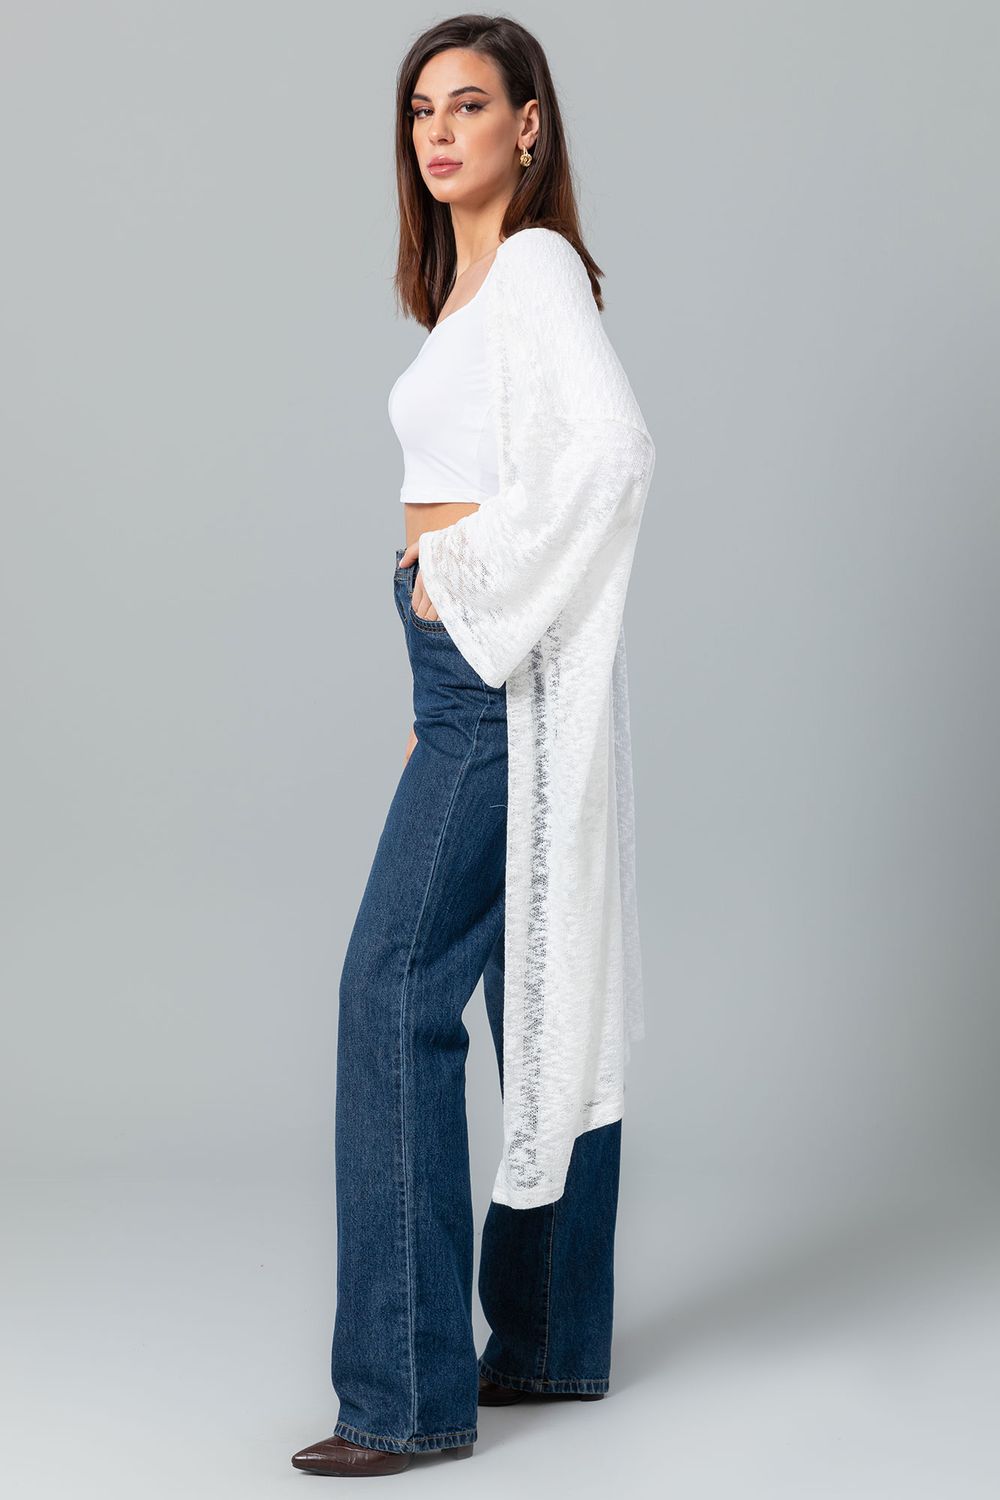 Knitted Slip On Open Neckline Loose cover up